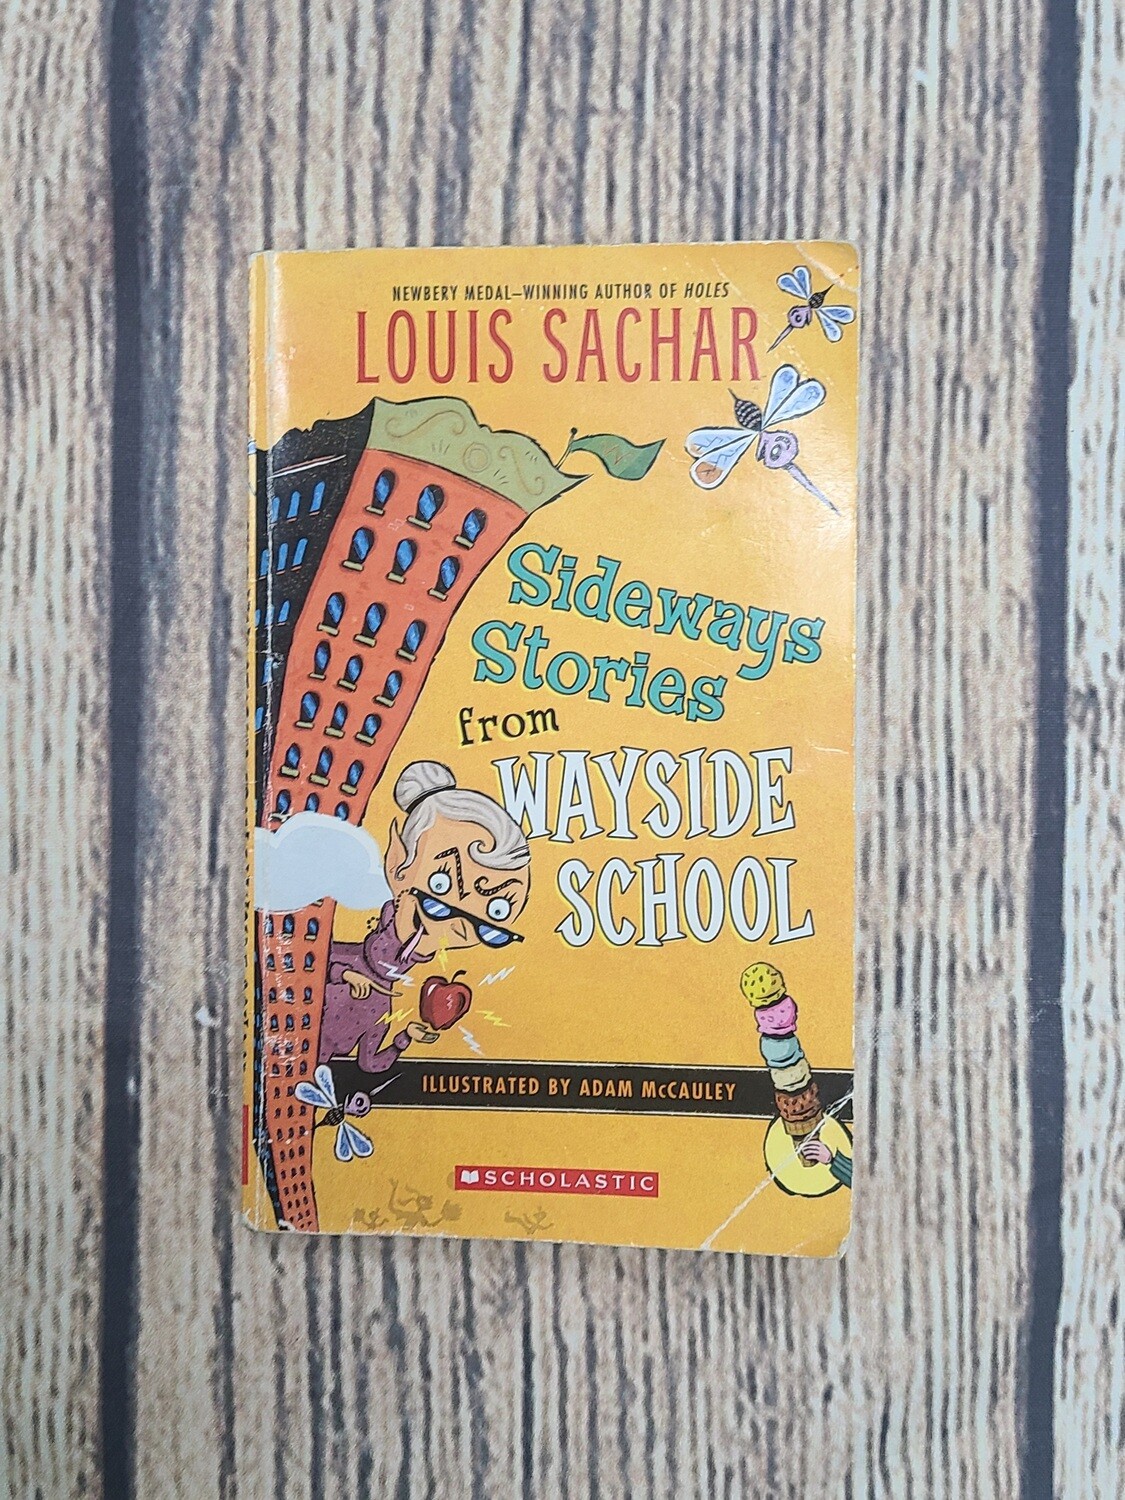 Sideways Stories from Wayside School by Louis Sachar and Illustrated by  Adam McCauley - Paperback - Fair Condition